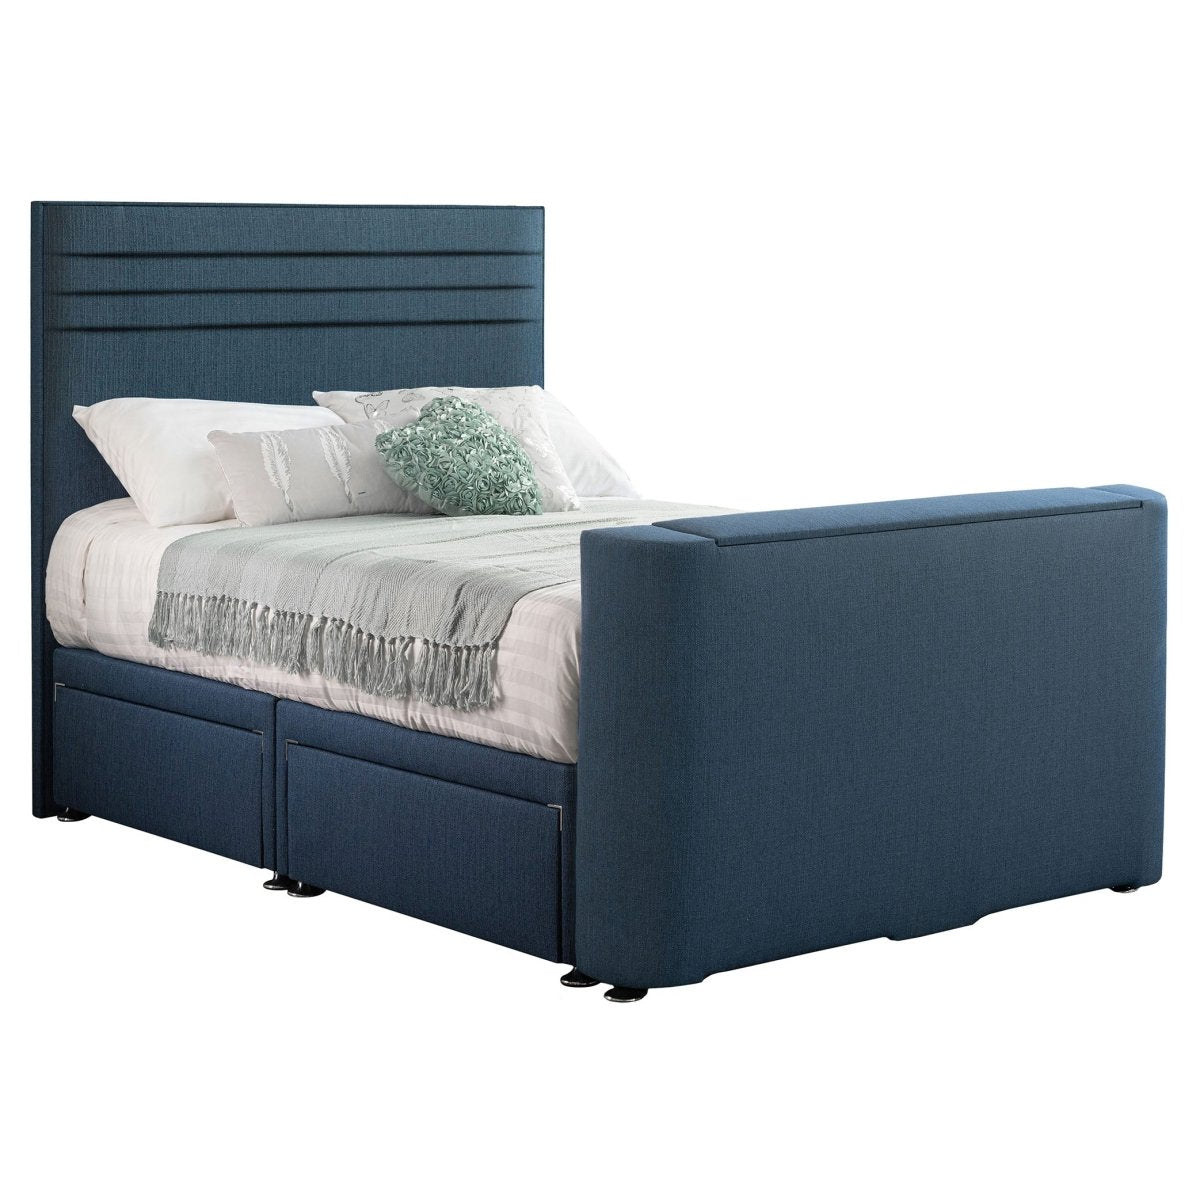 Sweet Dreams Image Chic TV Bed with Storage Options - TV Beds Northwest - INIMA-CHI135PT4DCHATS OYSTER - choose your colour tvbed - doubletvbed